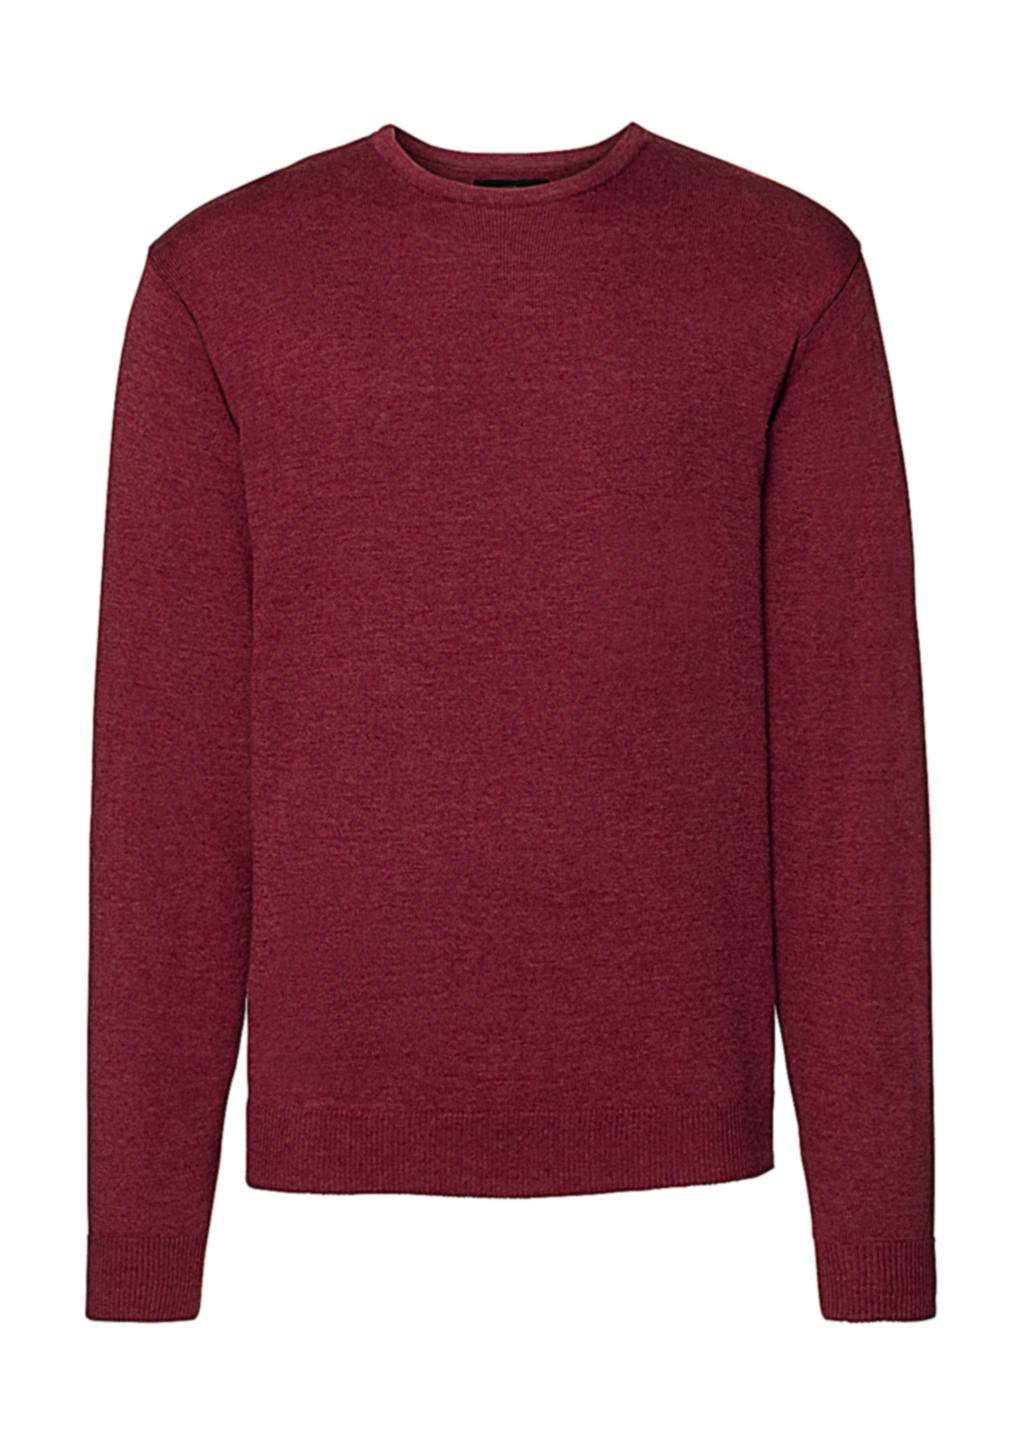  Mens Crew Neck Knitted Pullover in Farbe Cranberry Marl